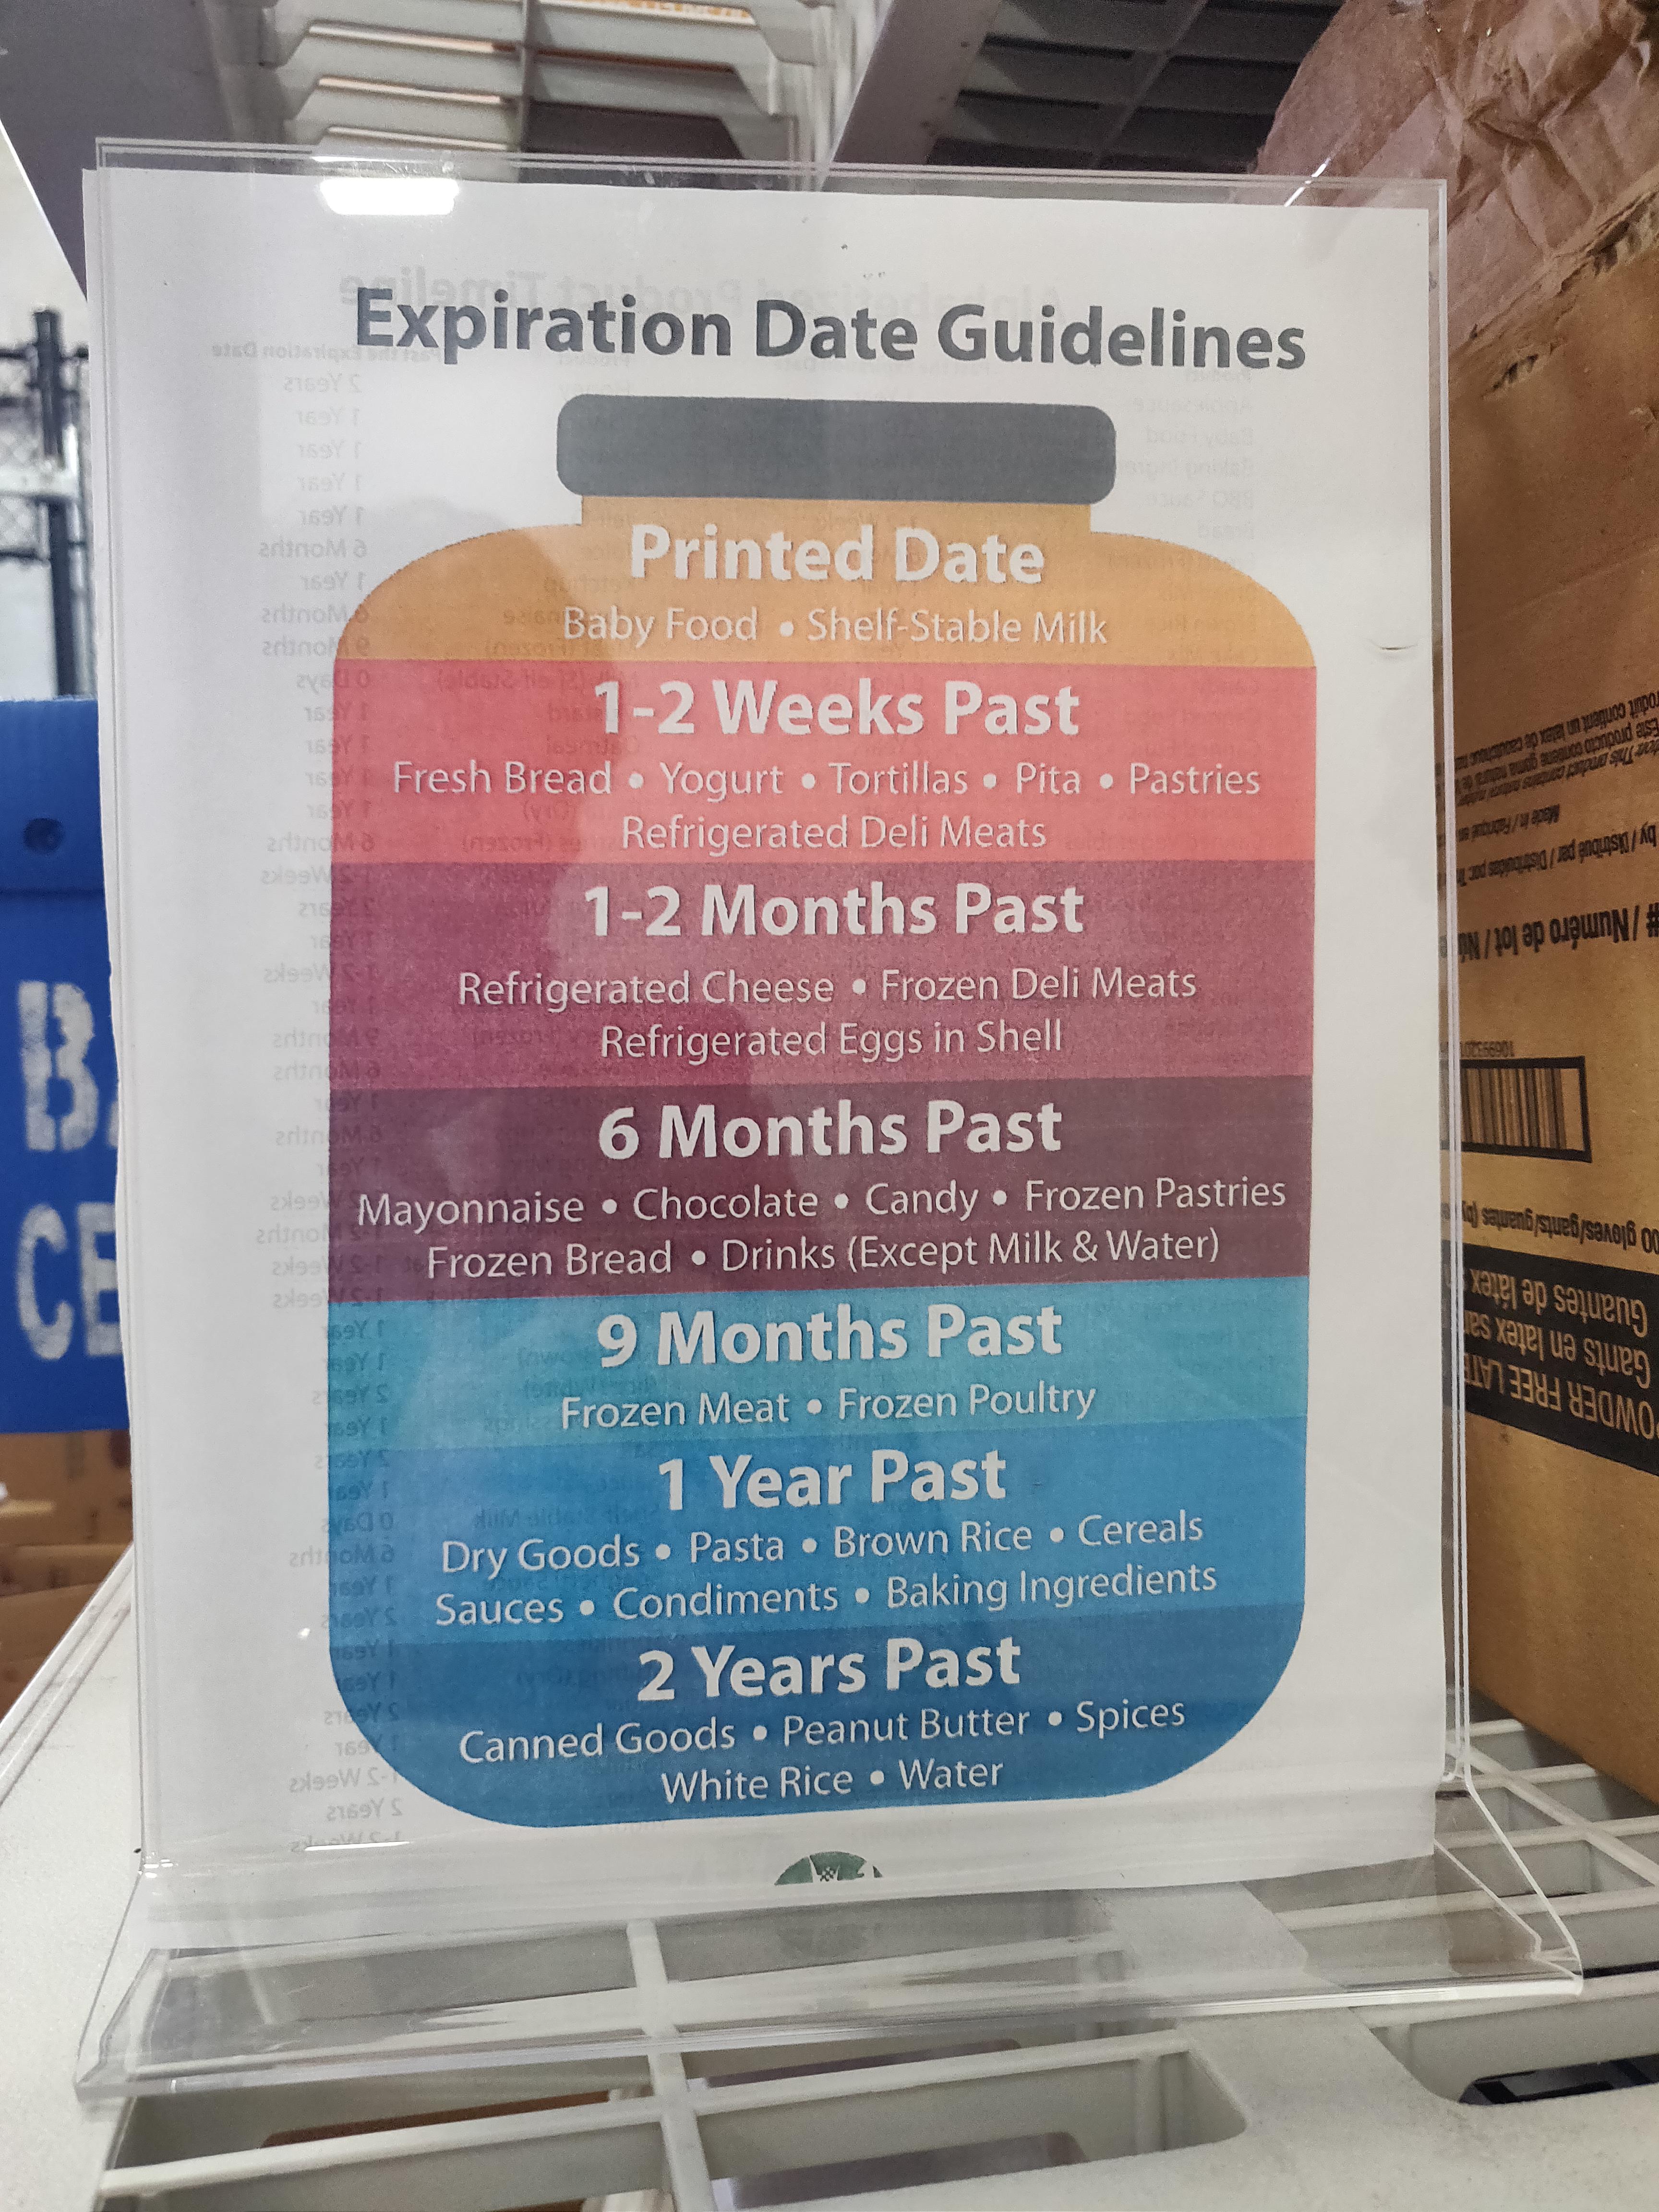 poster - Expiration Date Guidelines Run Bi Ce Printed Date Lily Foods Small 12 Weeks Past Fresh Bread Yogurt. Tortillas Pastries Refrigerated Delivets 12 Months Past Refrigerated Cheese Frozen Delfiteals Refrigerated Engs in Shell 6 Months Past Mayonnaise